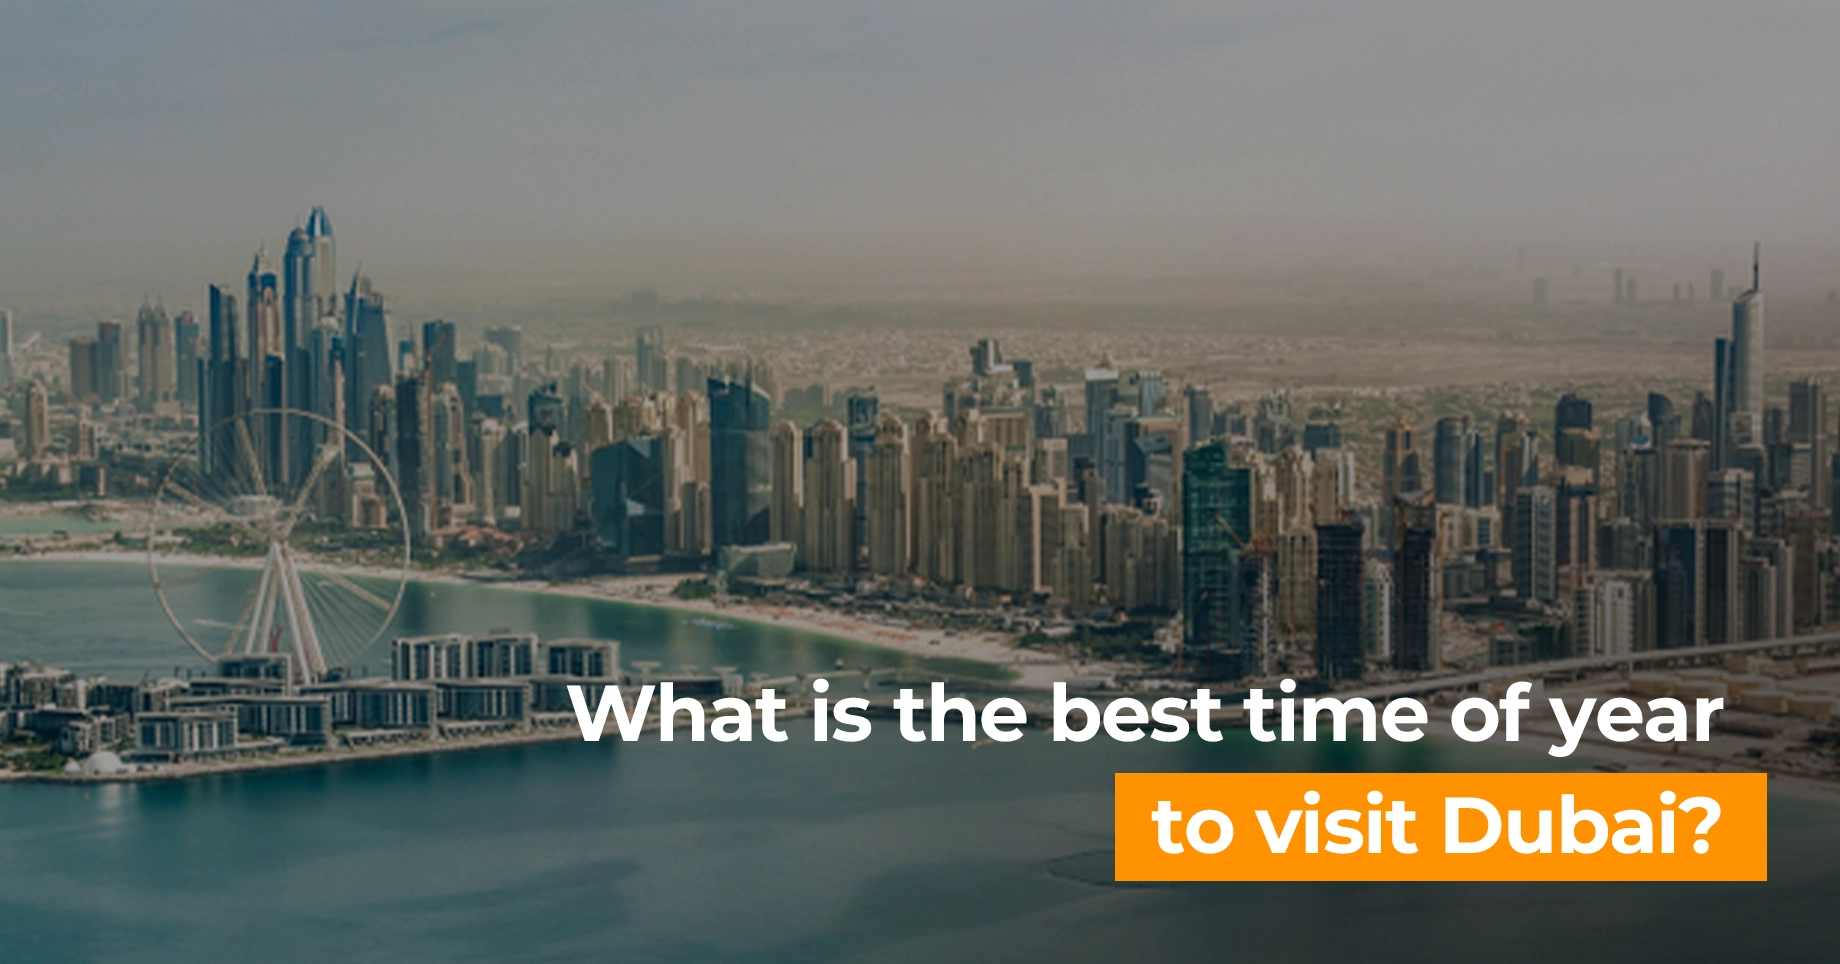 What is the best time of year to visit Dubai?